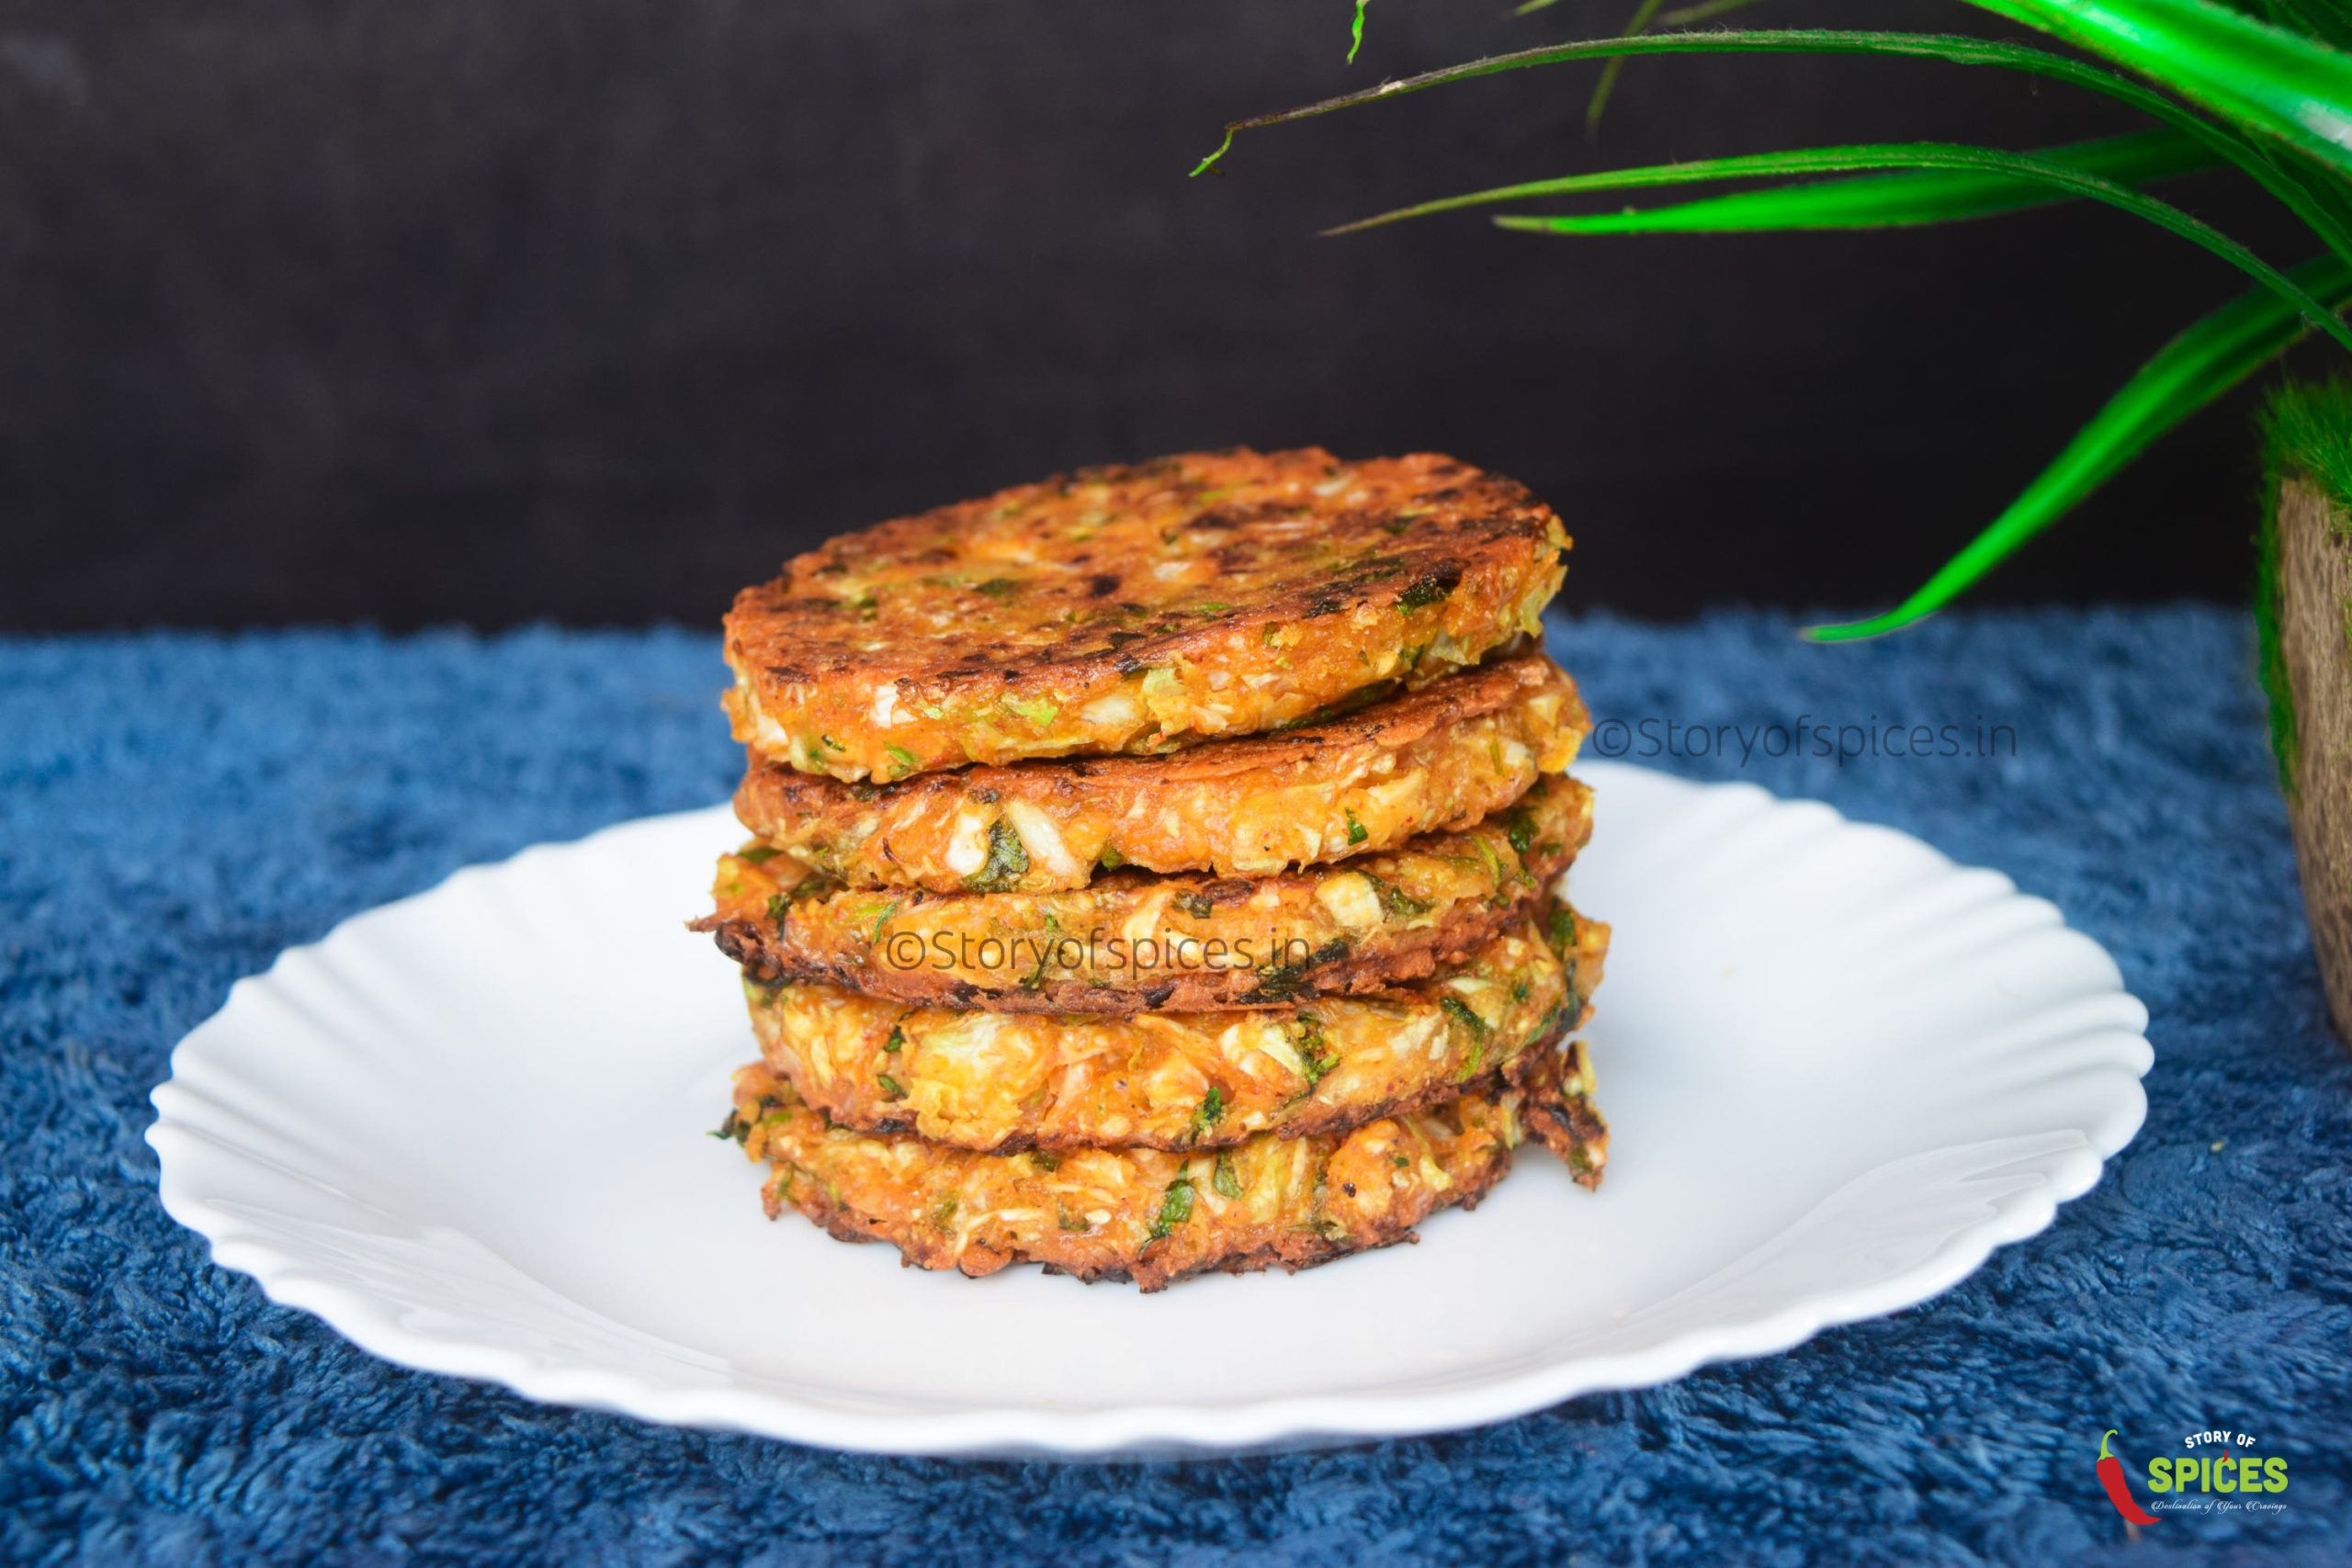 Cabbage-Patties-Recipe-story-of-spices